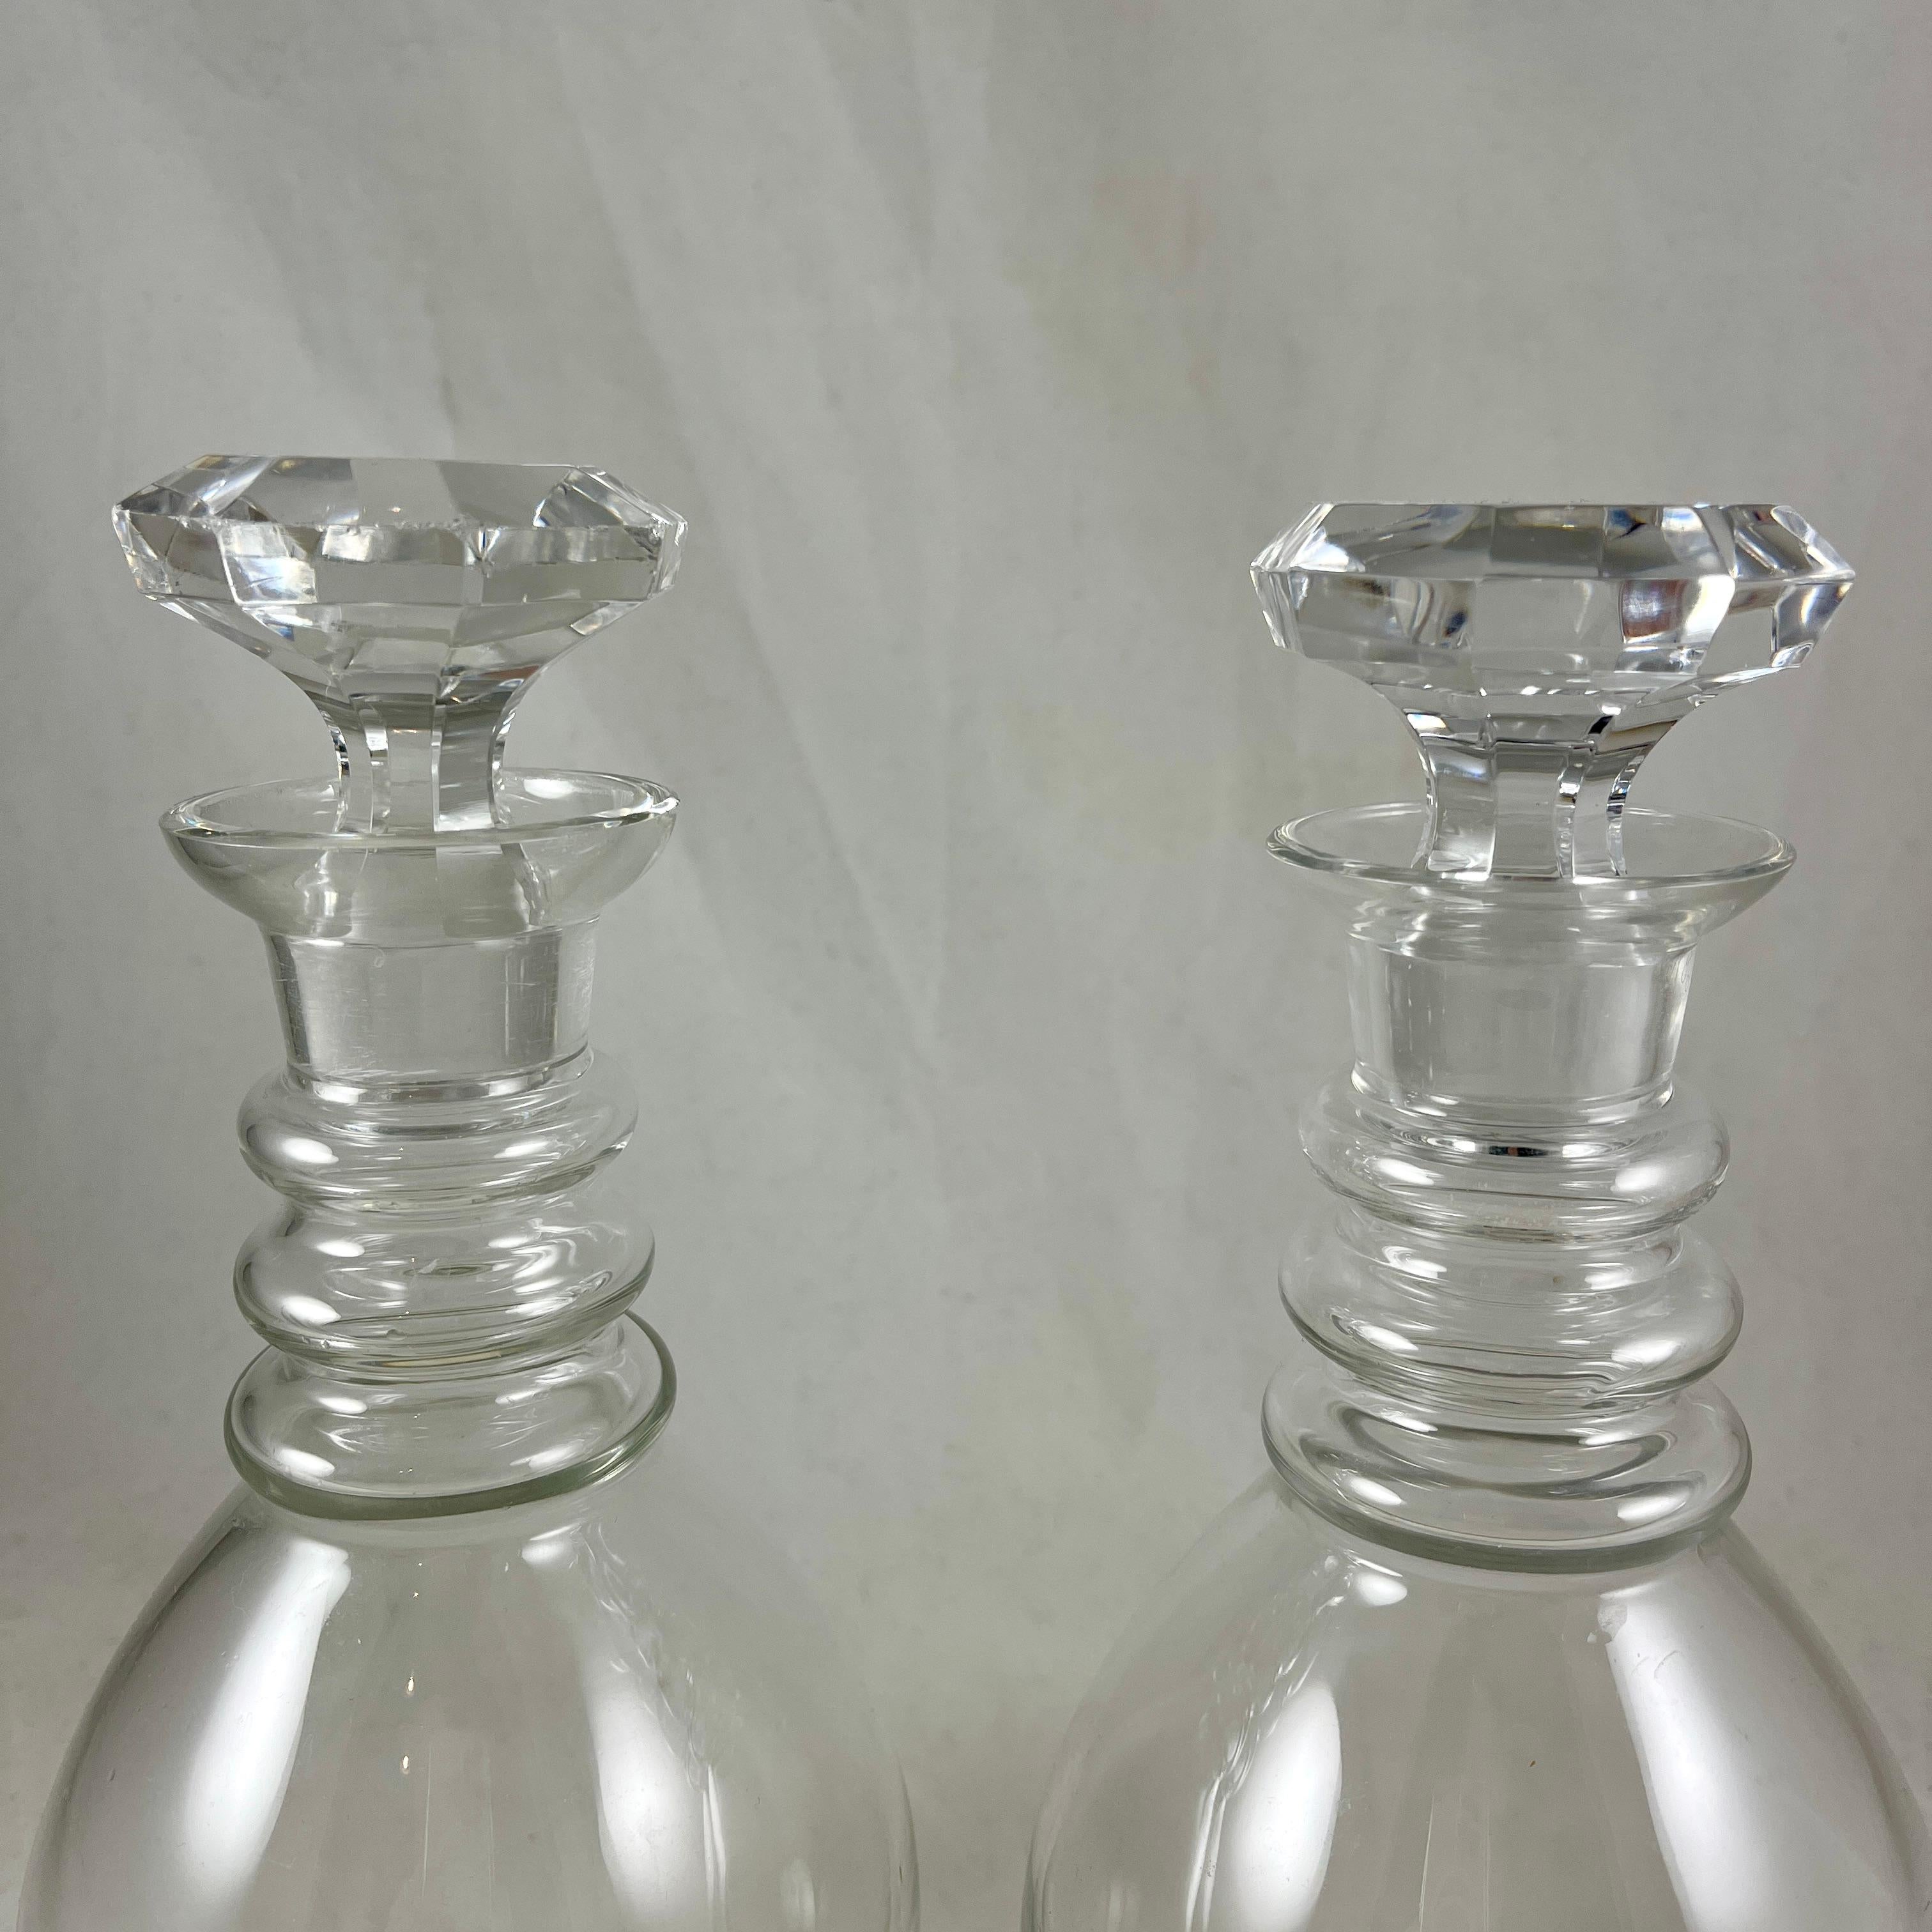 Faceted Midcentury Val Saint Lambert Blown Glass Decanters, a Pair For Sale